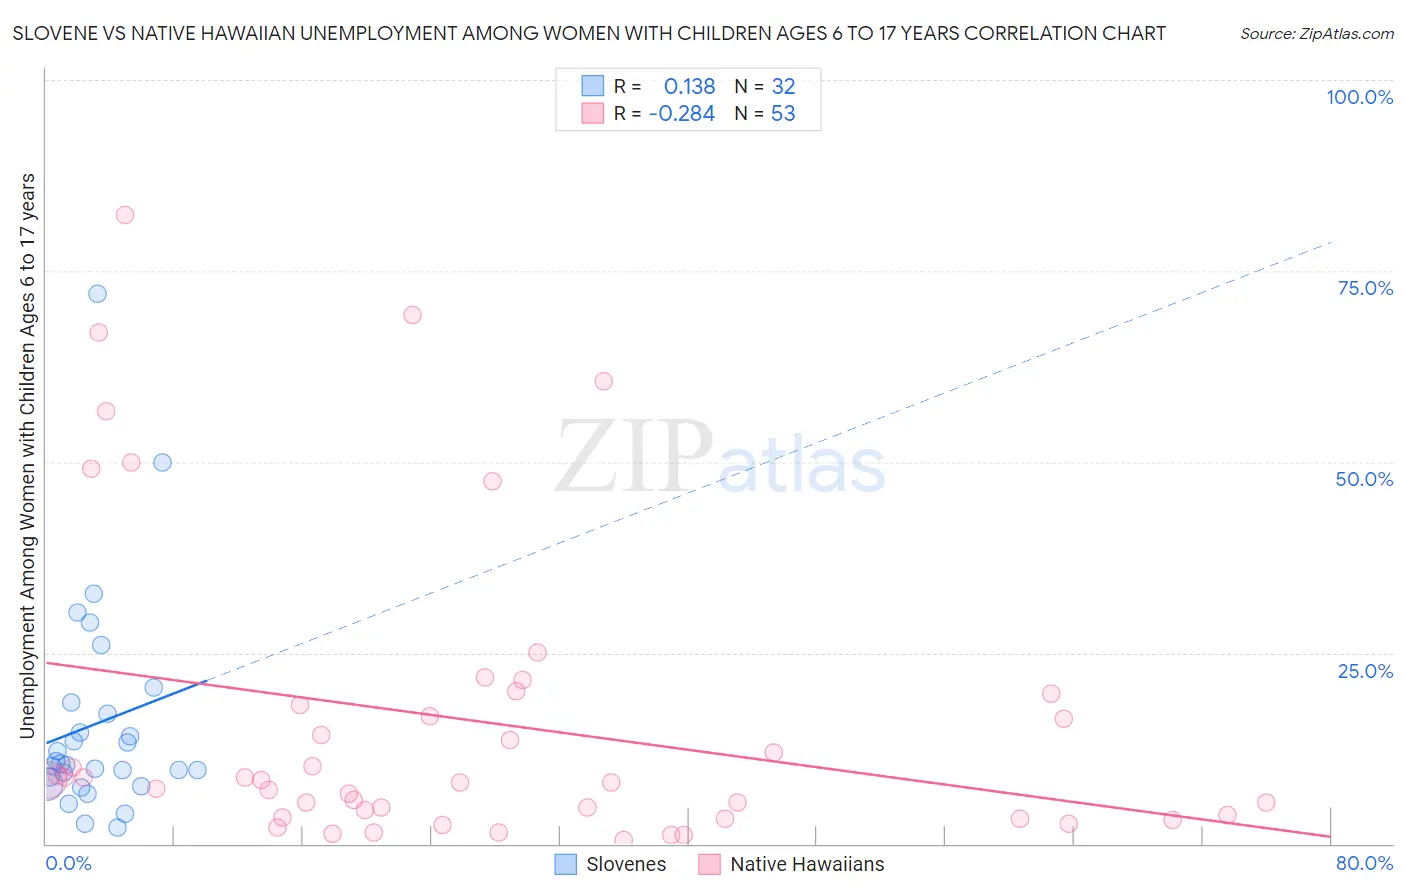 Slovene vs Native Hawaiian Unemployment Among Women with Children Ages 6 to 17 years